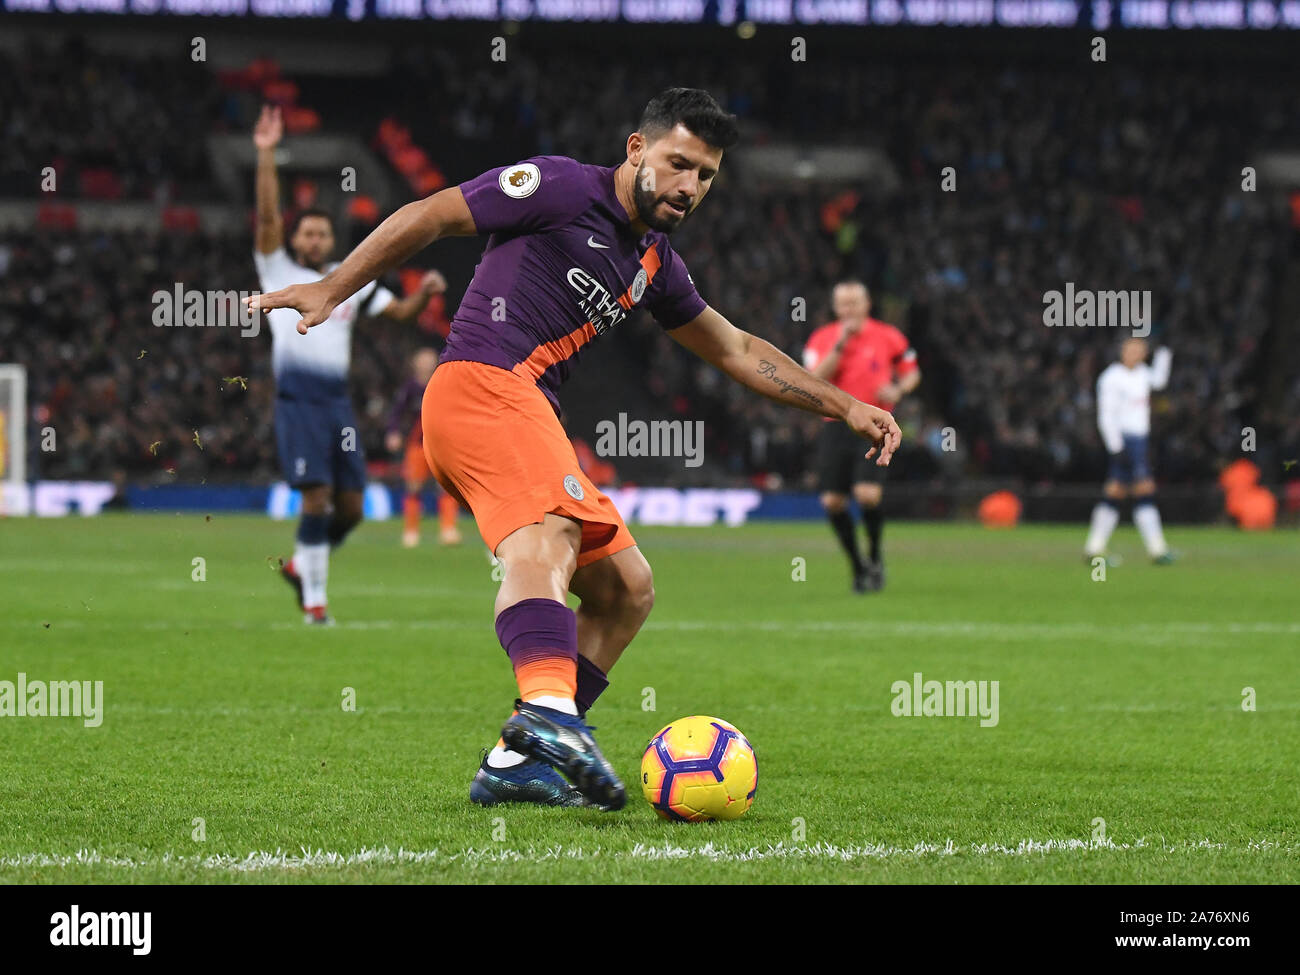 LONDON, ENGLAND - OCTOBER 29, 2018: Sergio Aguero of City pictured during the 2018/19 English Premier League game between Tottenham Hotspur and Manchester City at Wembley Stadium. Stock Photo